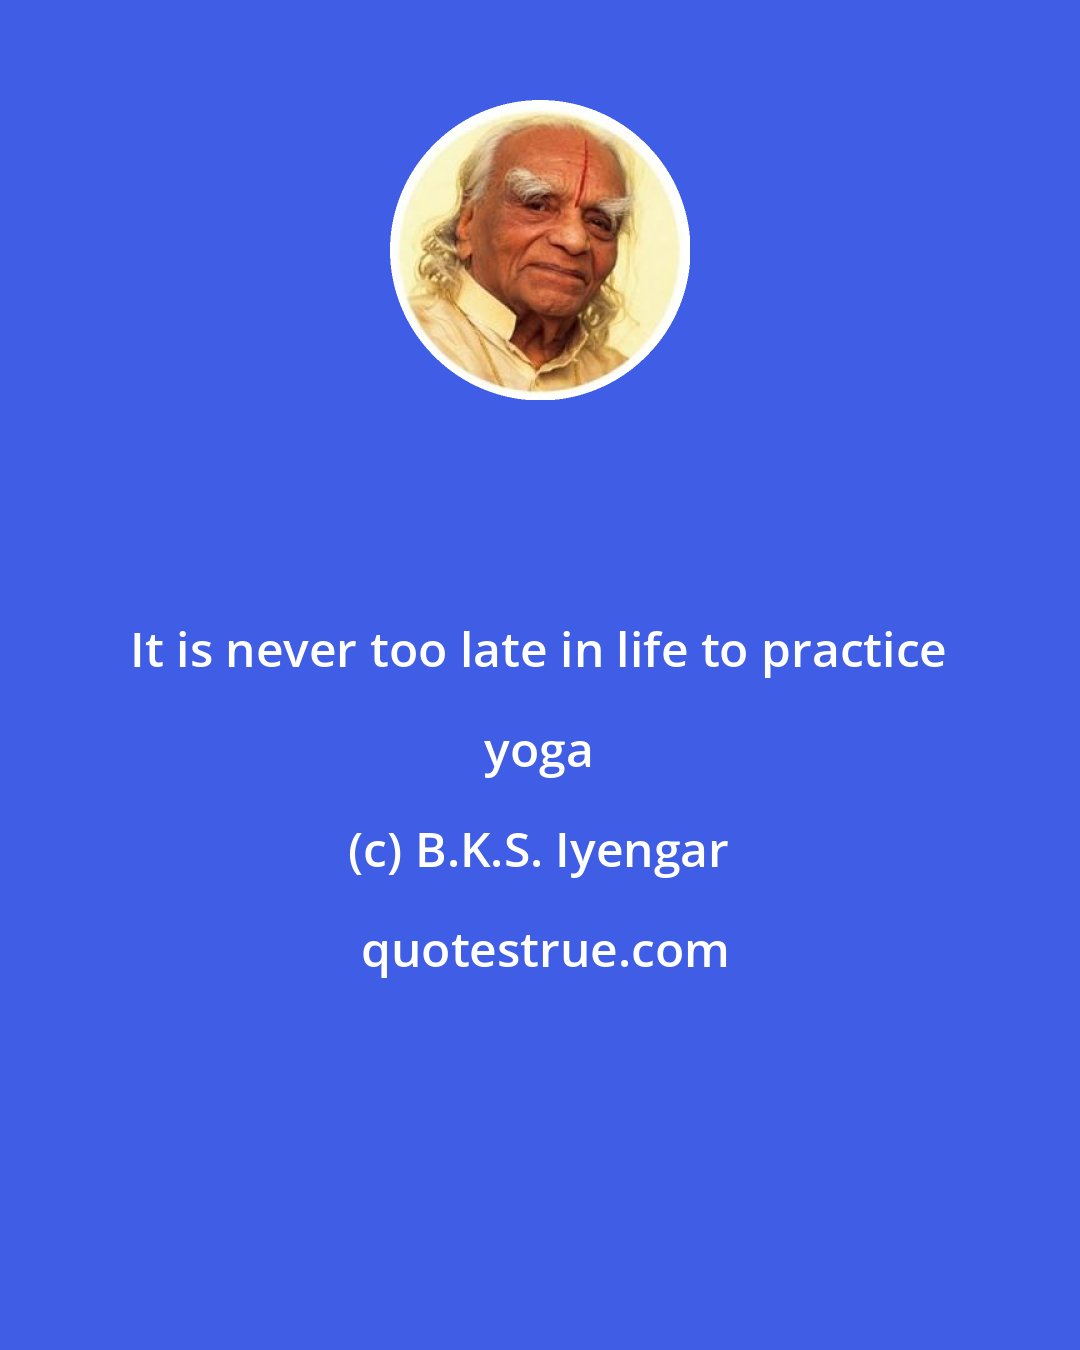 B.K.S. Iyengar: It is never too late in life to practice yoga